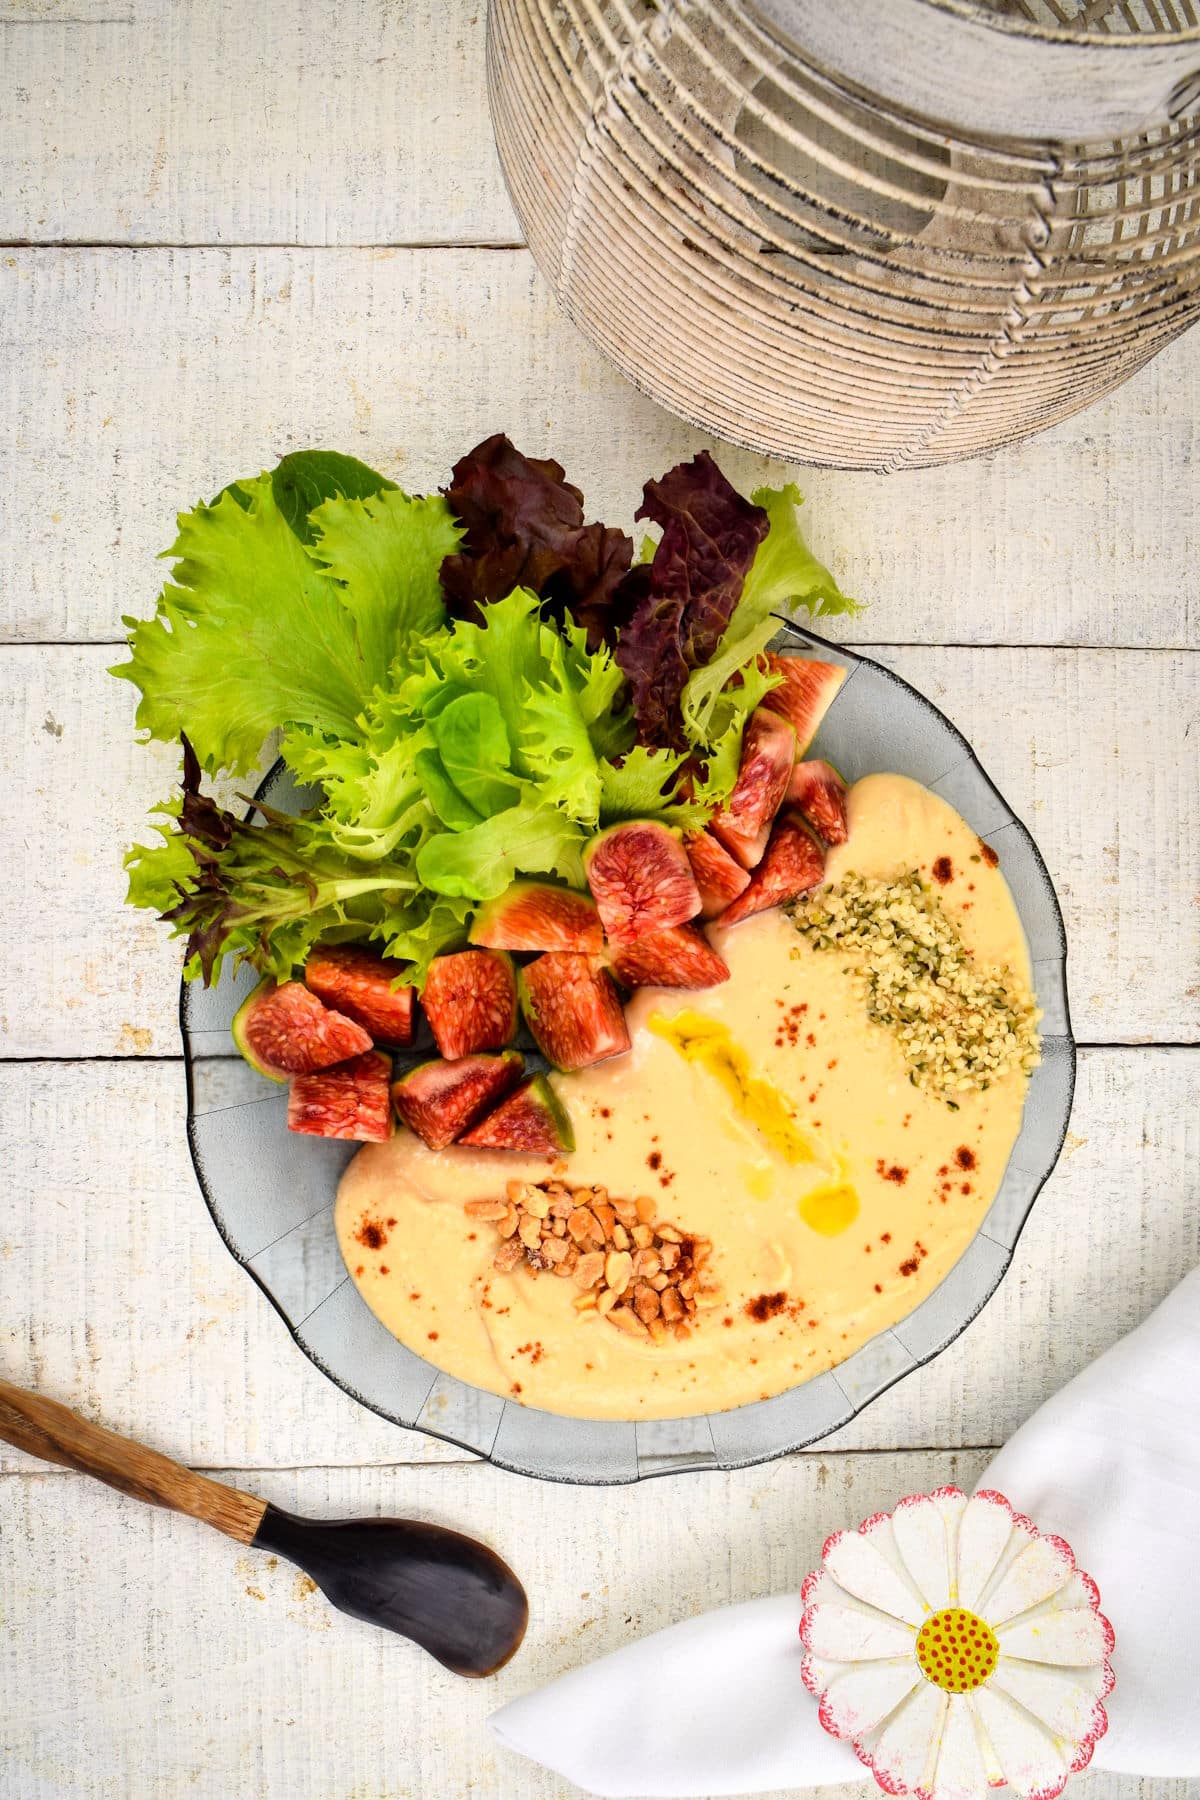 Hummus dip in a bowl with fresh lettuce, figs, nuts, hemp seeds and olive oil.